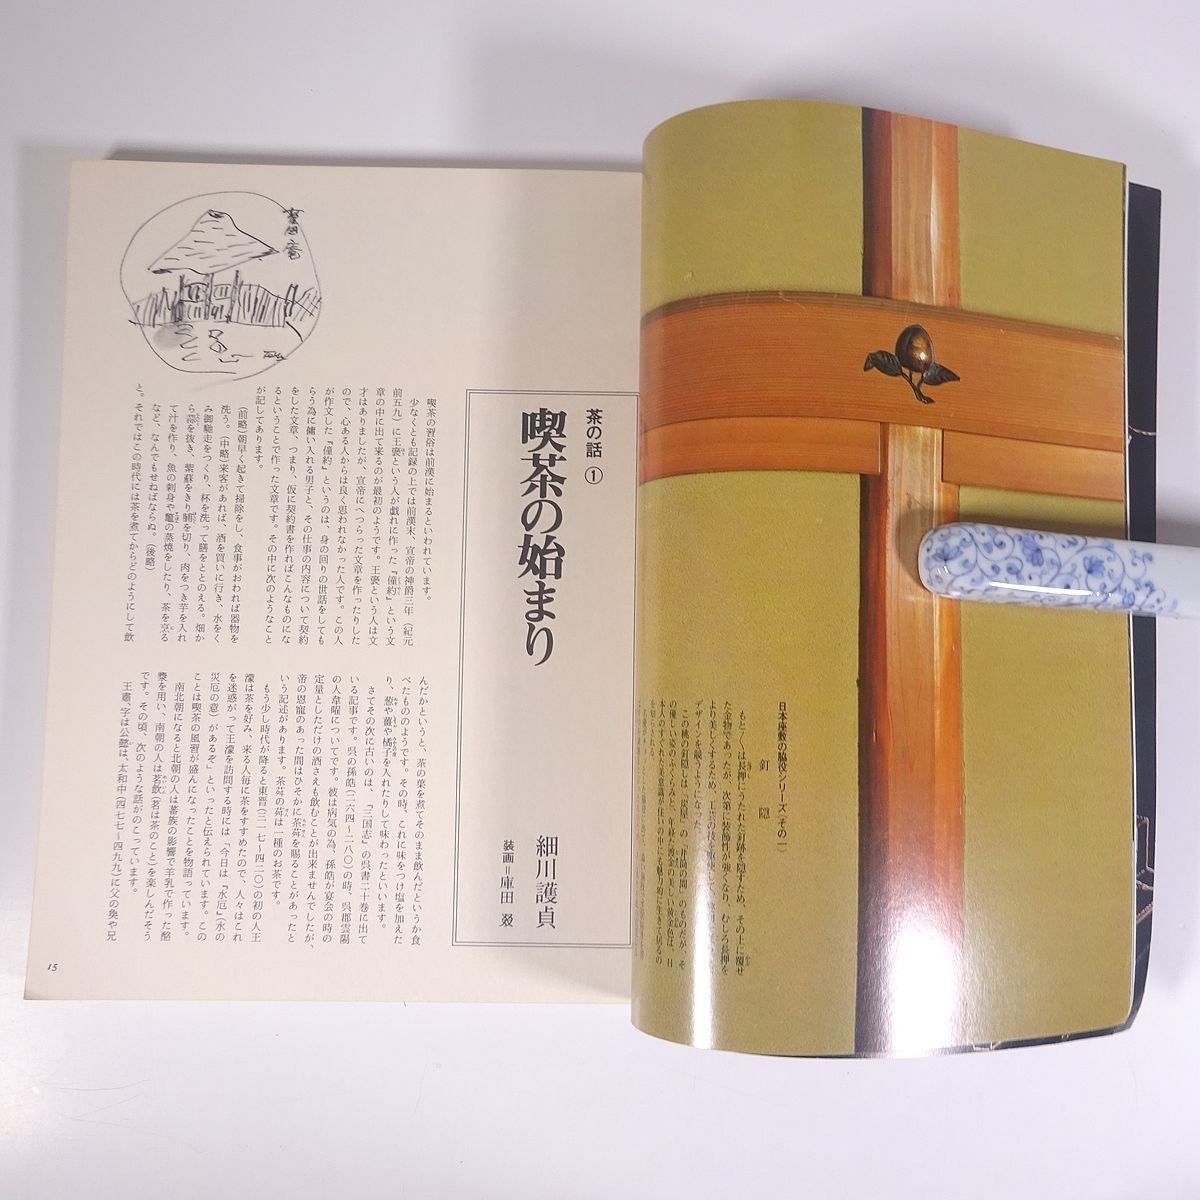  tea. hot water -years old hour chronicle spring sun collection Heibonsha 1981 large book@ tea ceremony history history of Japan 